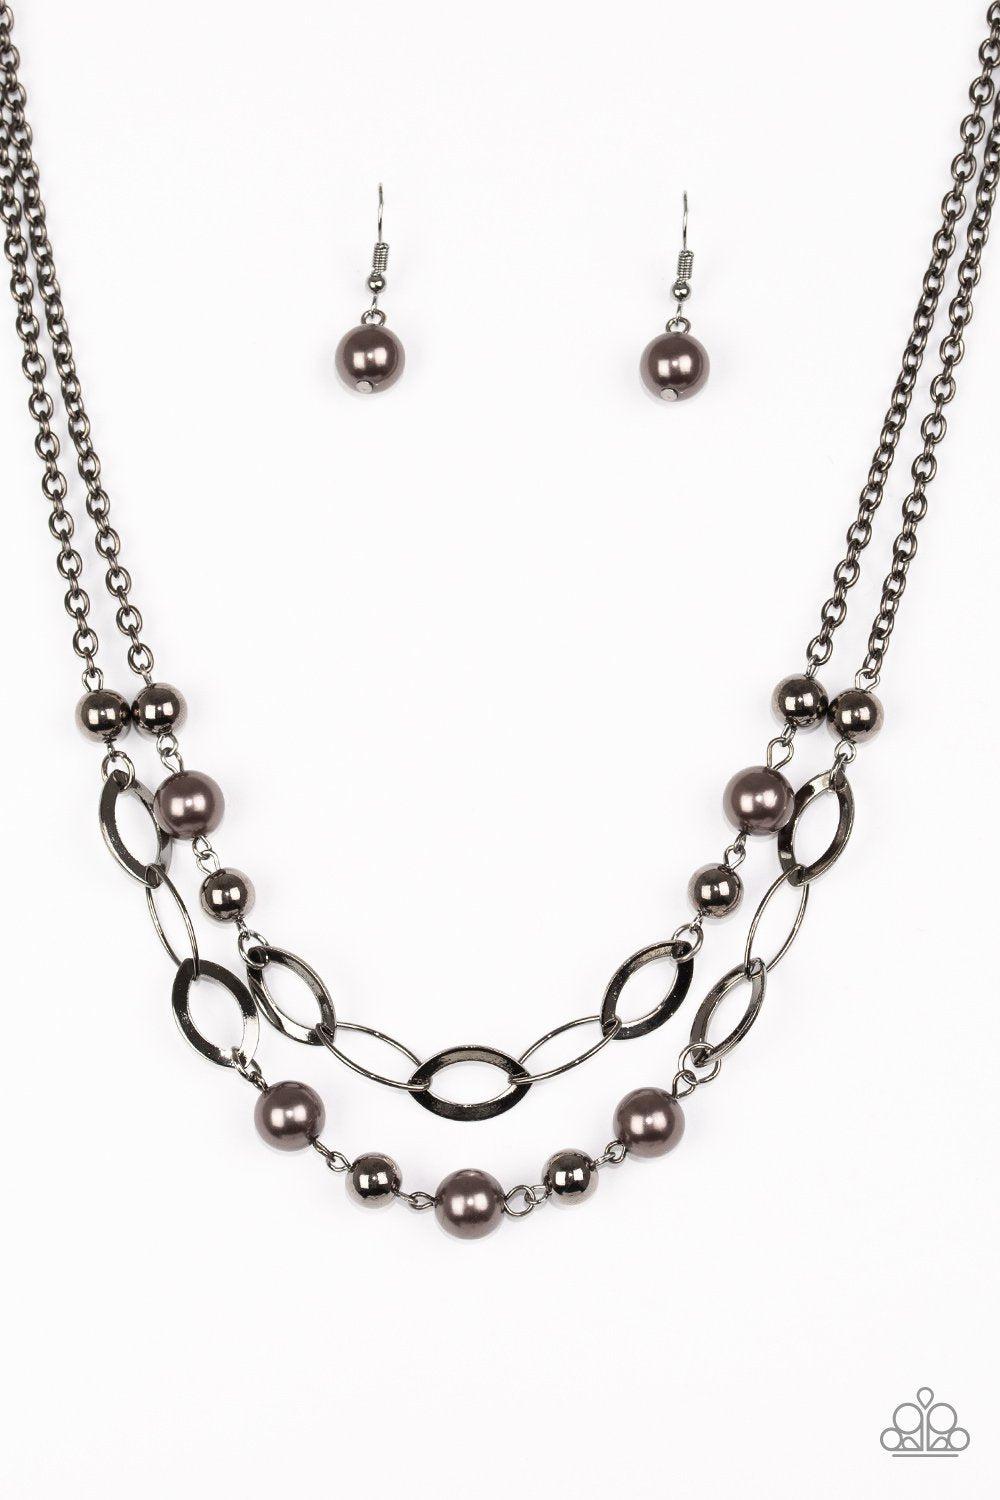 GLIMMER Takes All - Black Gunmetal Necklace and matching Earrings - Paparazzi Accessories-CarasShop.com - $5 Jewelry by Cara Jewels